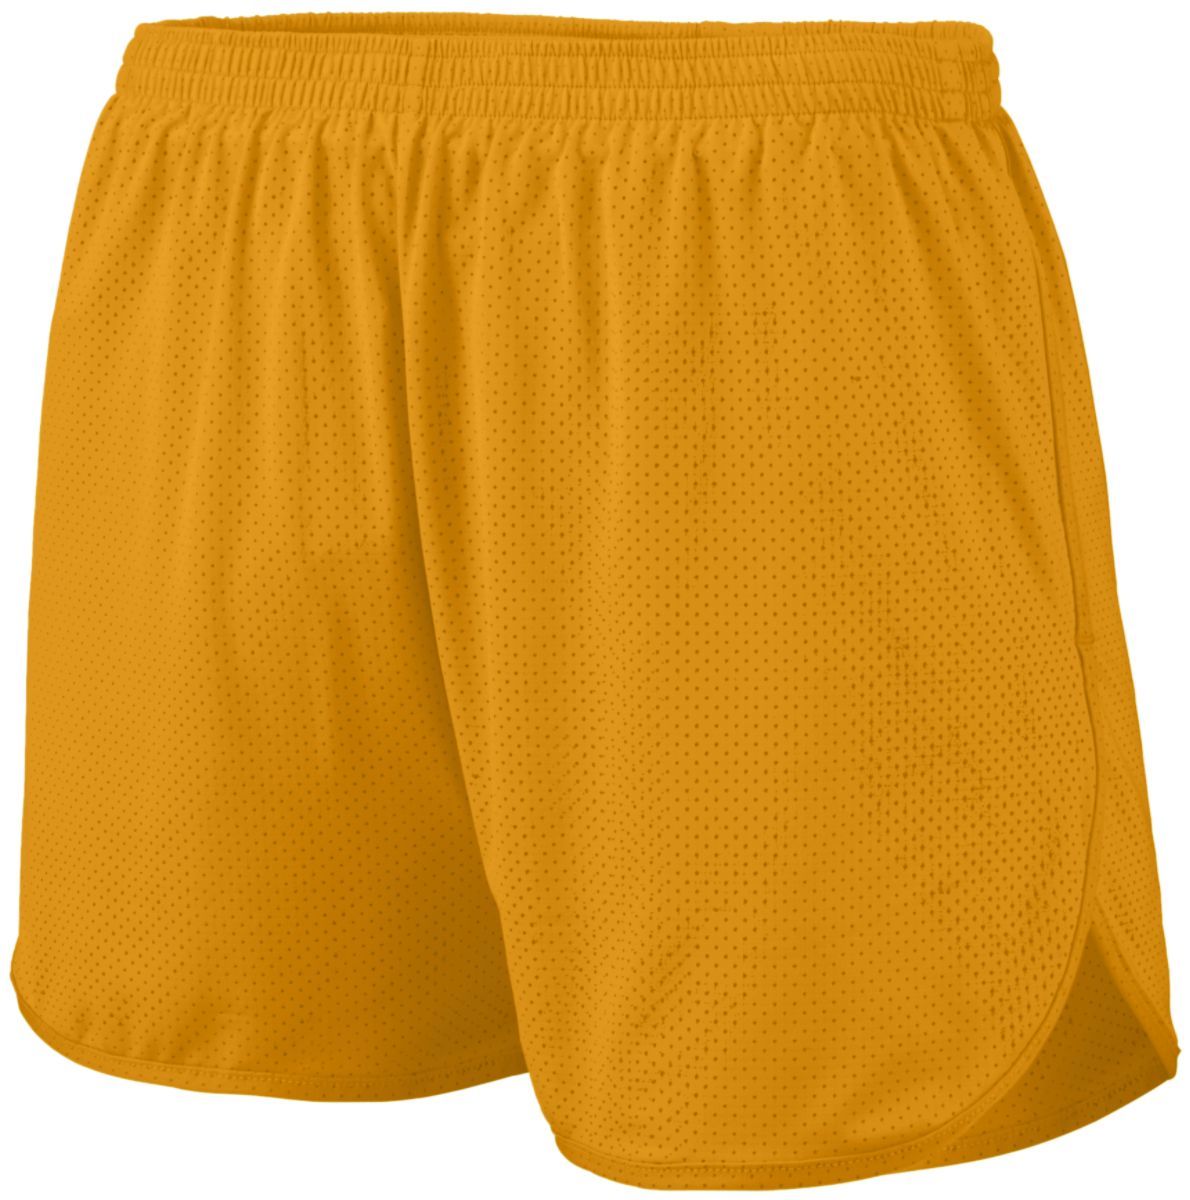 Augusta Sportswear Solid Split Shorts in Gold  -Part of the Adult, Adult-Shorts, Augusta-Products, Track-Field product lines at KanaleyCreations.com